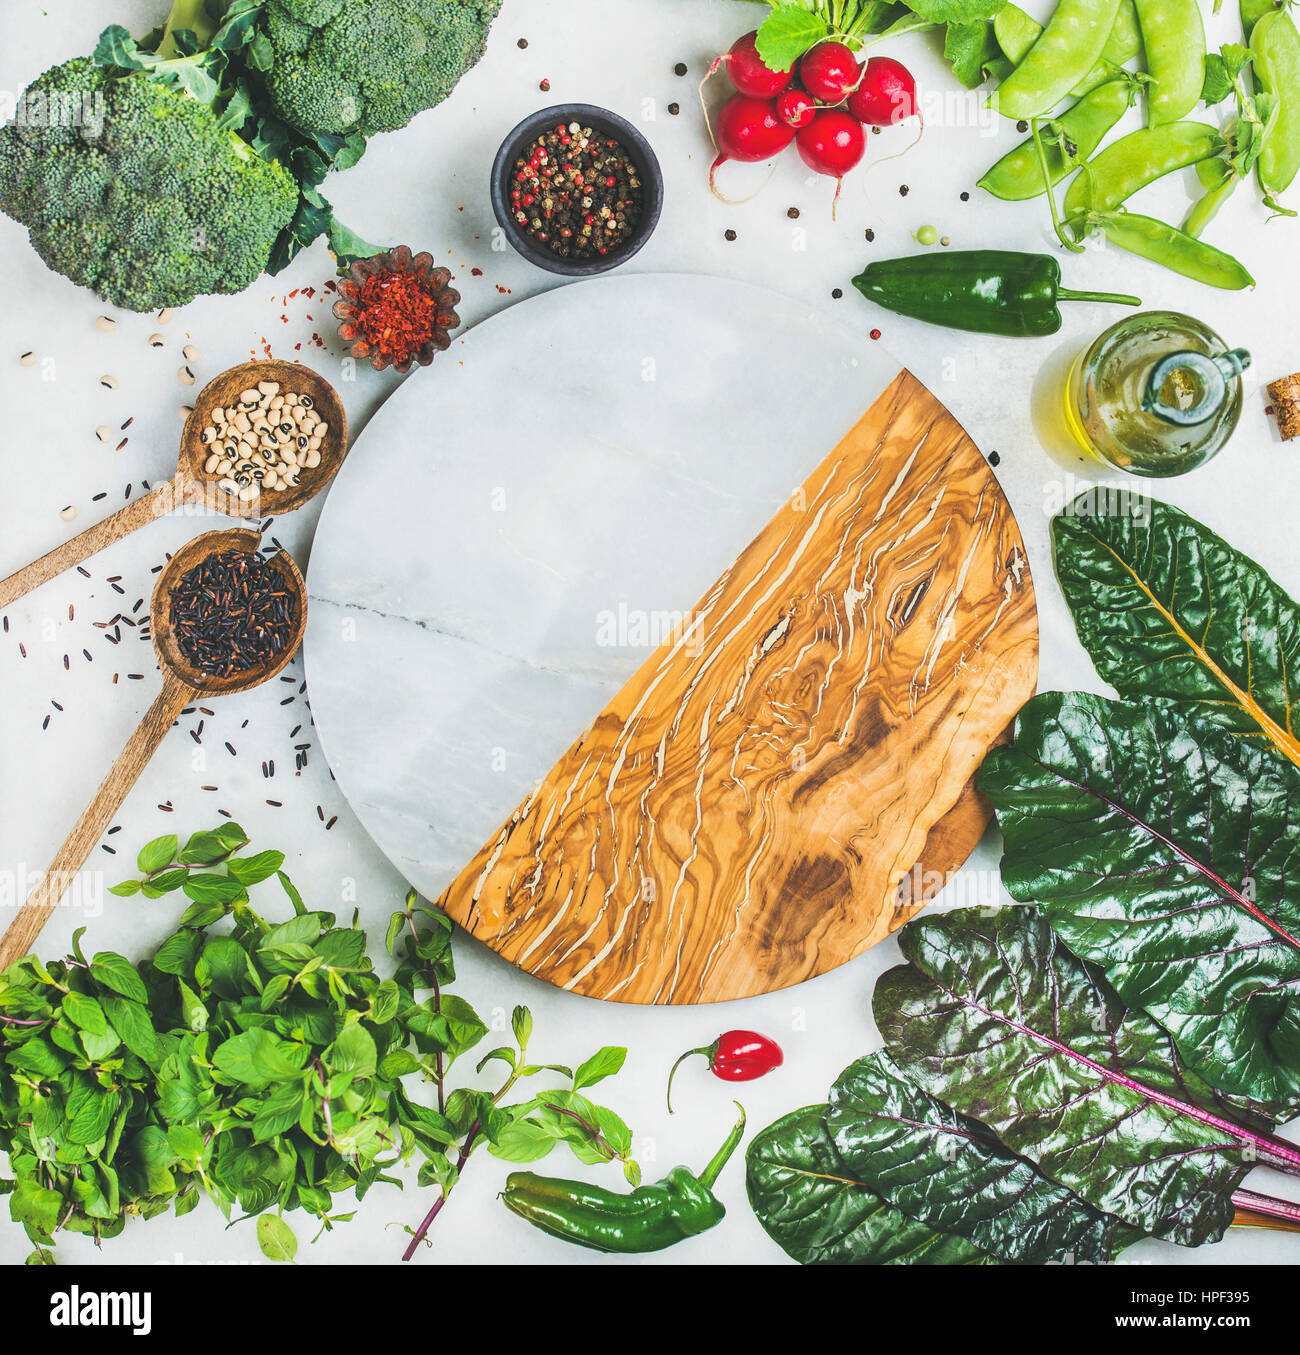 Fresh raw greens, vegetables, olive oil and grains over light grey marble kitchen countertop, round board in center, top view, copy space. Healthy, cl Stock Photo